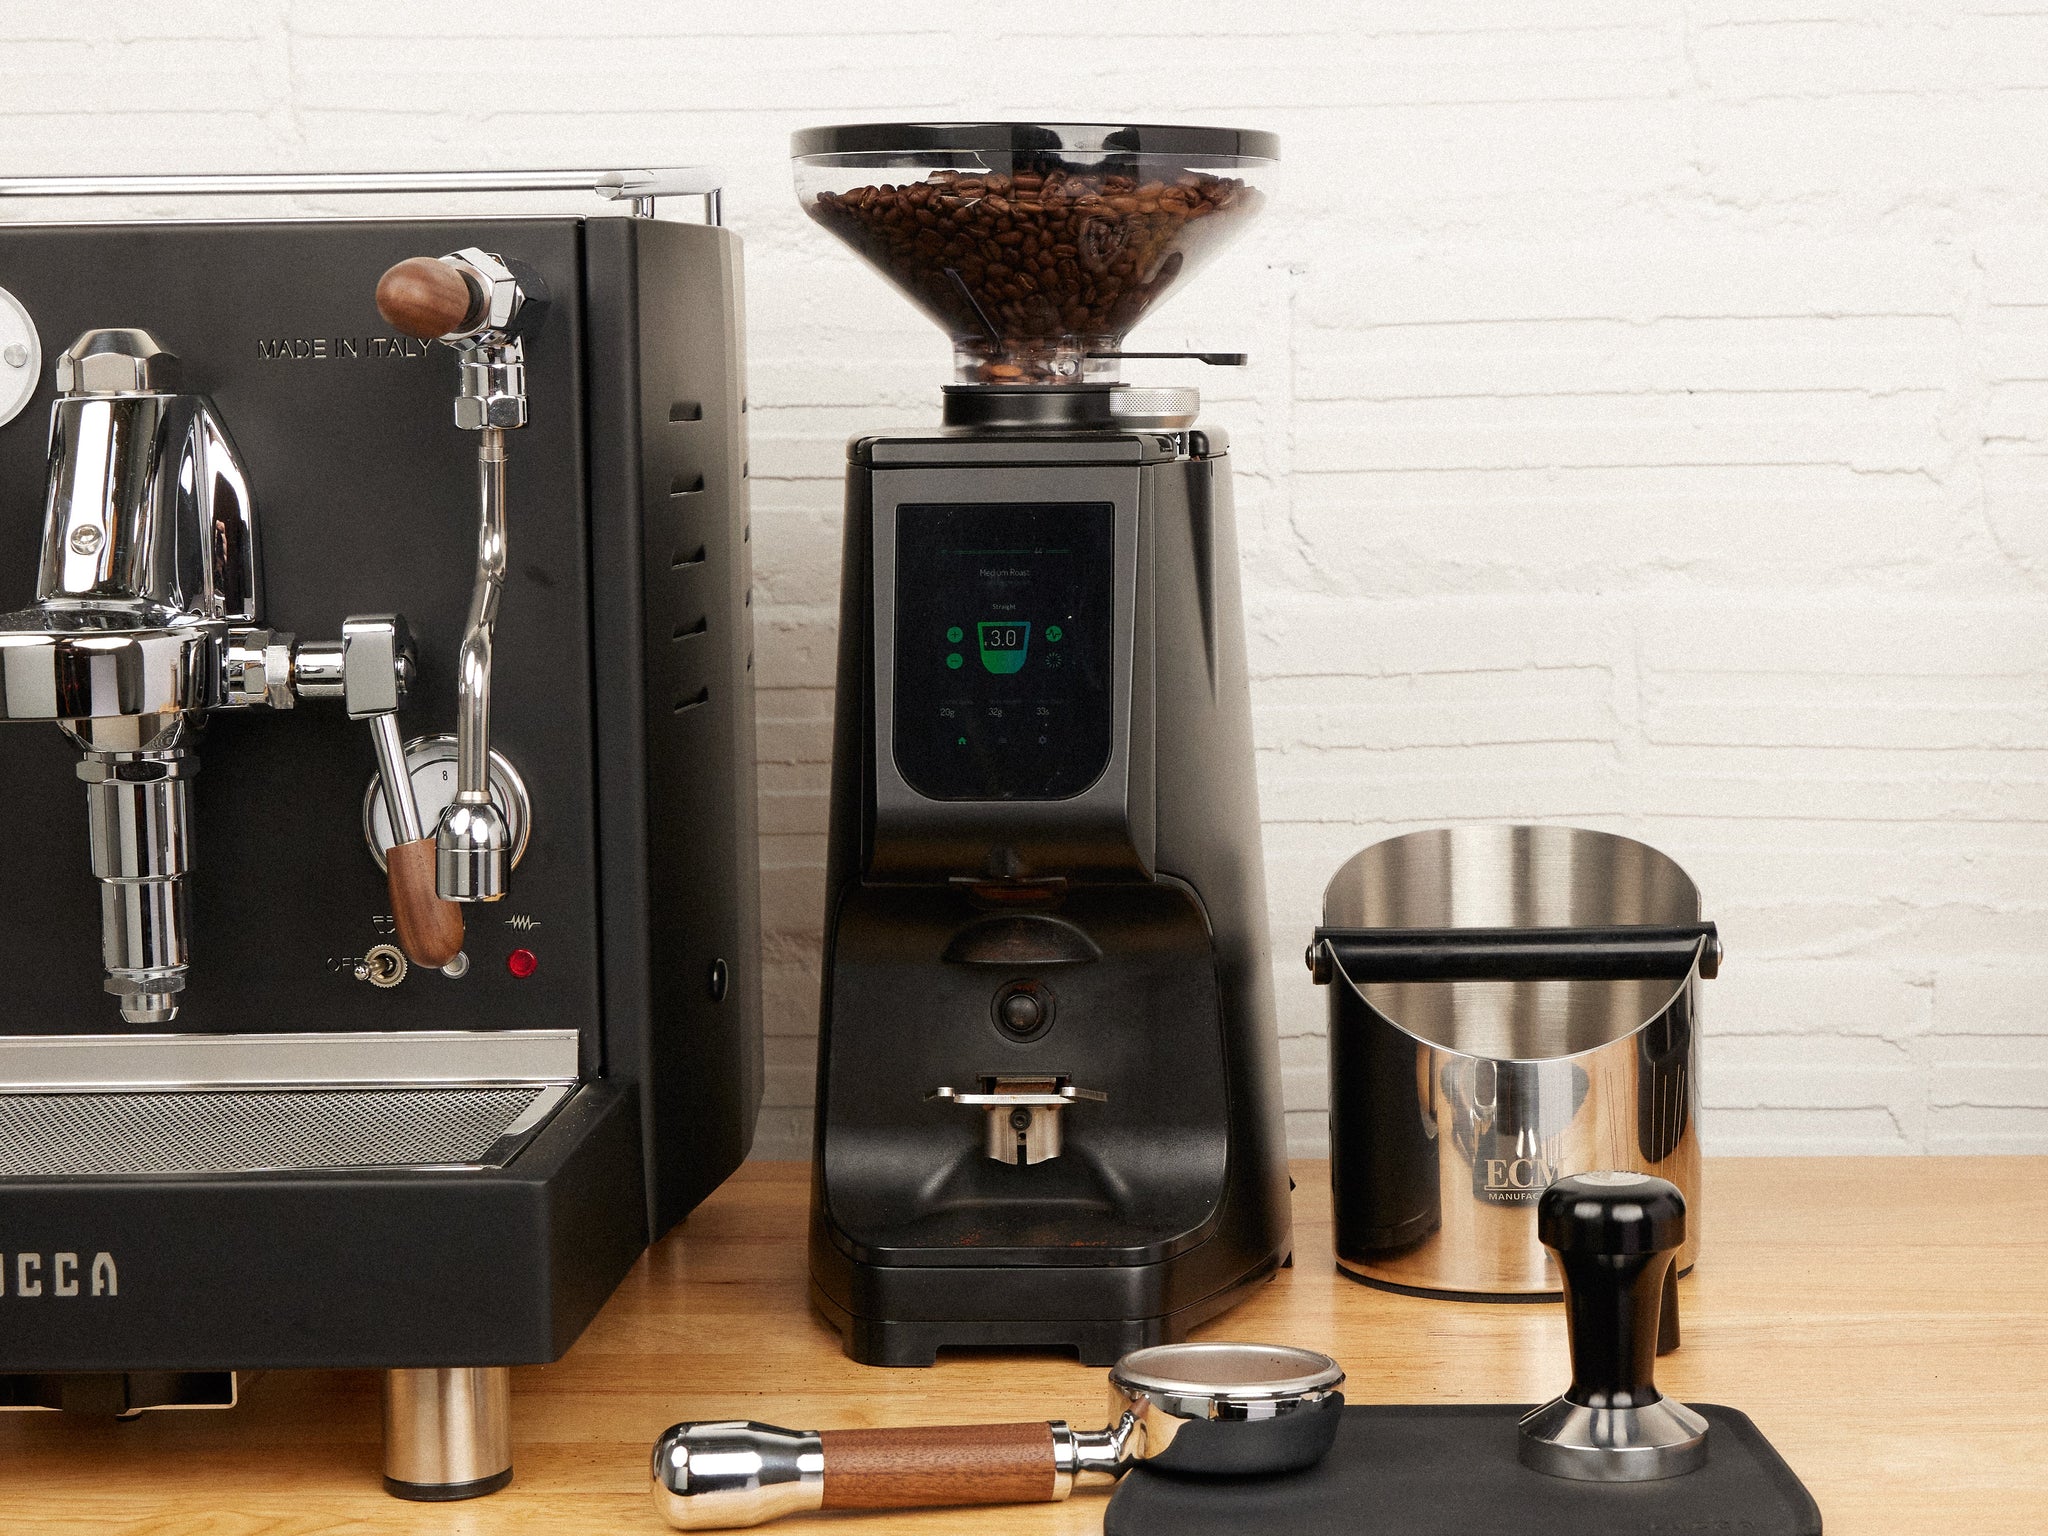 LUCCA M58 Espresso Machine, LUCCA Atom 75 Grinder, LUCCA Stainless Steel Espresso Tamper, Clive Coffee, knockout